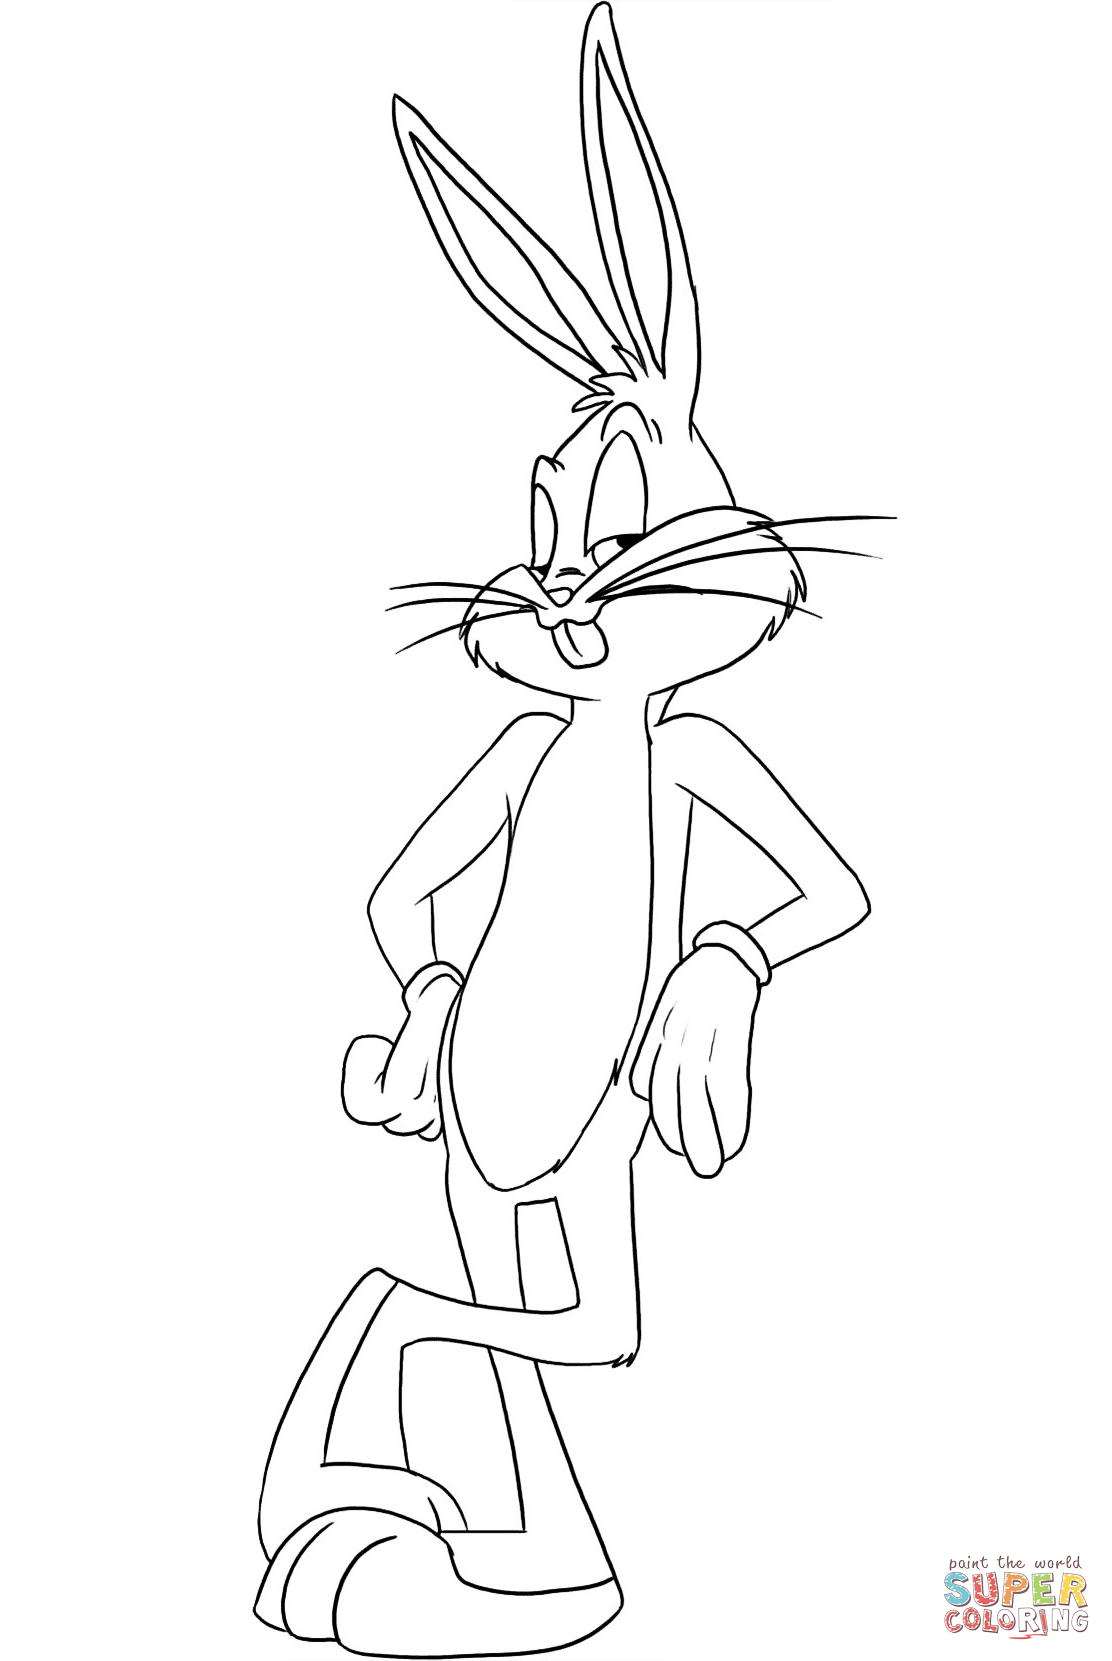 Bugs Bunny | My Art Work In 2019 | Pinterest | Bunny Coloring Pages - Free Printable Bugs Bunny Coloring Pages